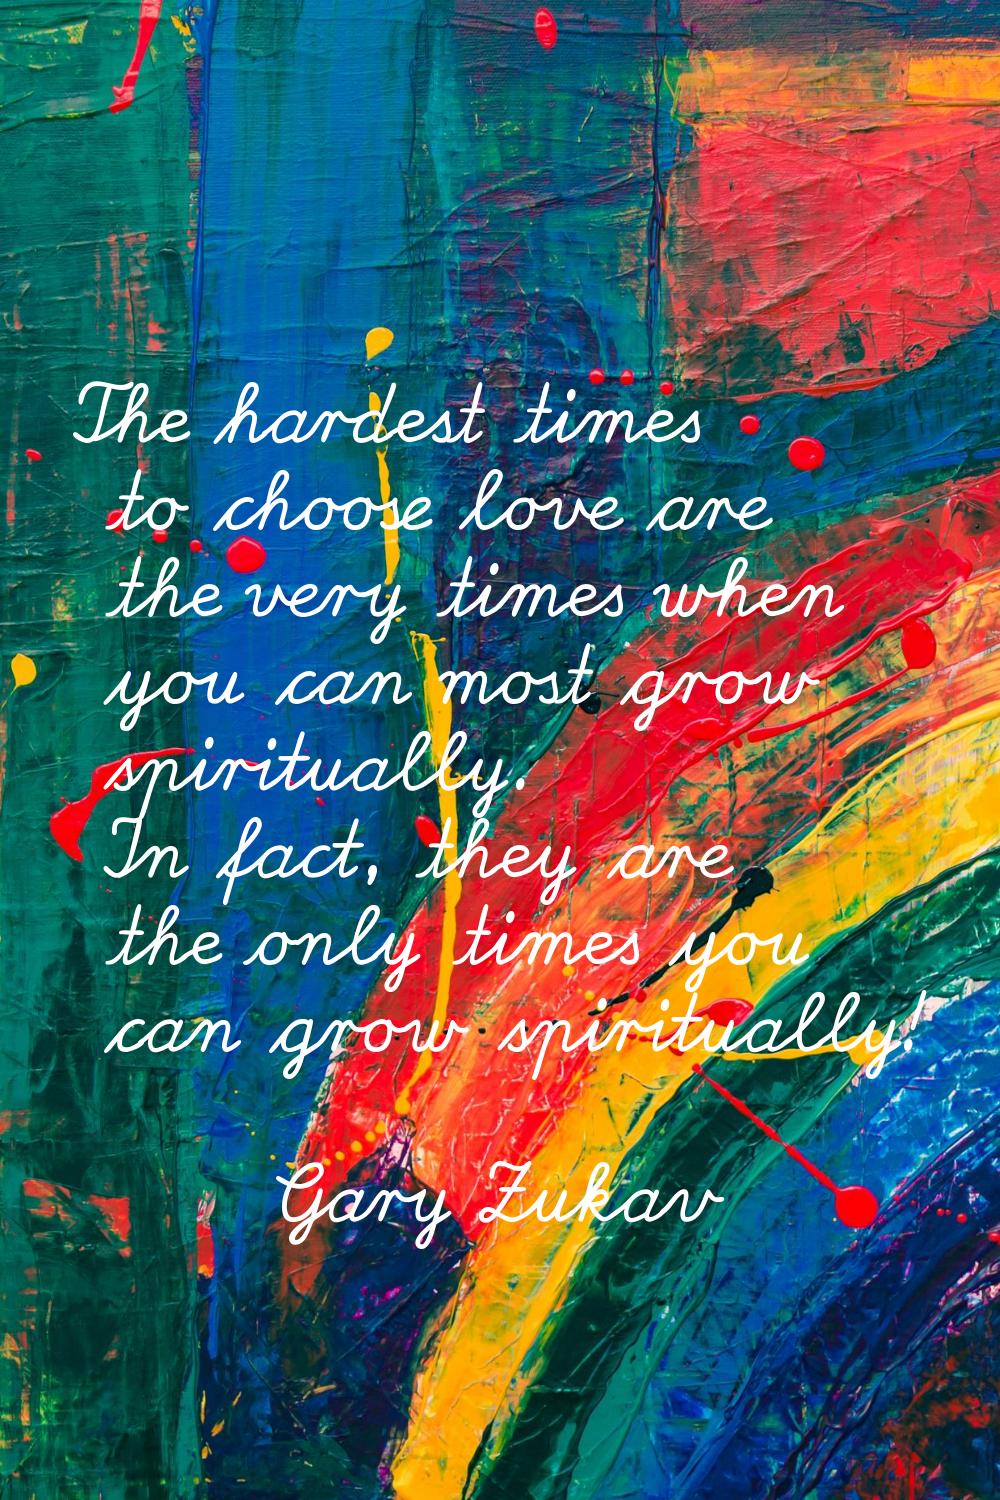 The hardest times to choose love are the very times when you can most grow spiritually. In fact, th